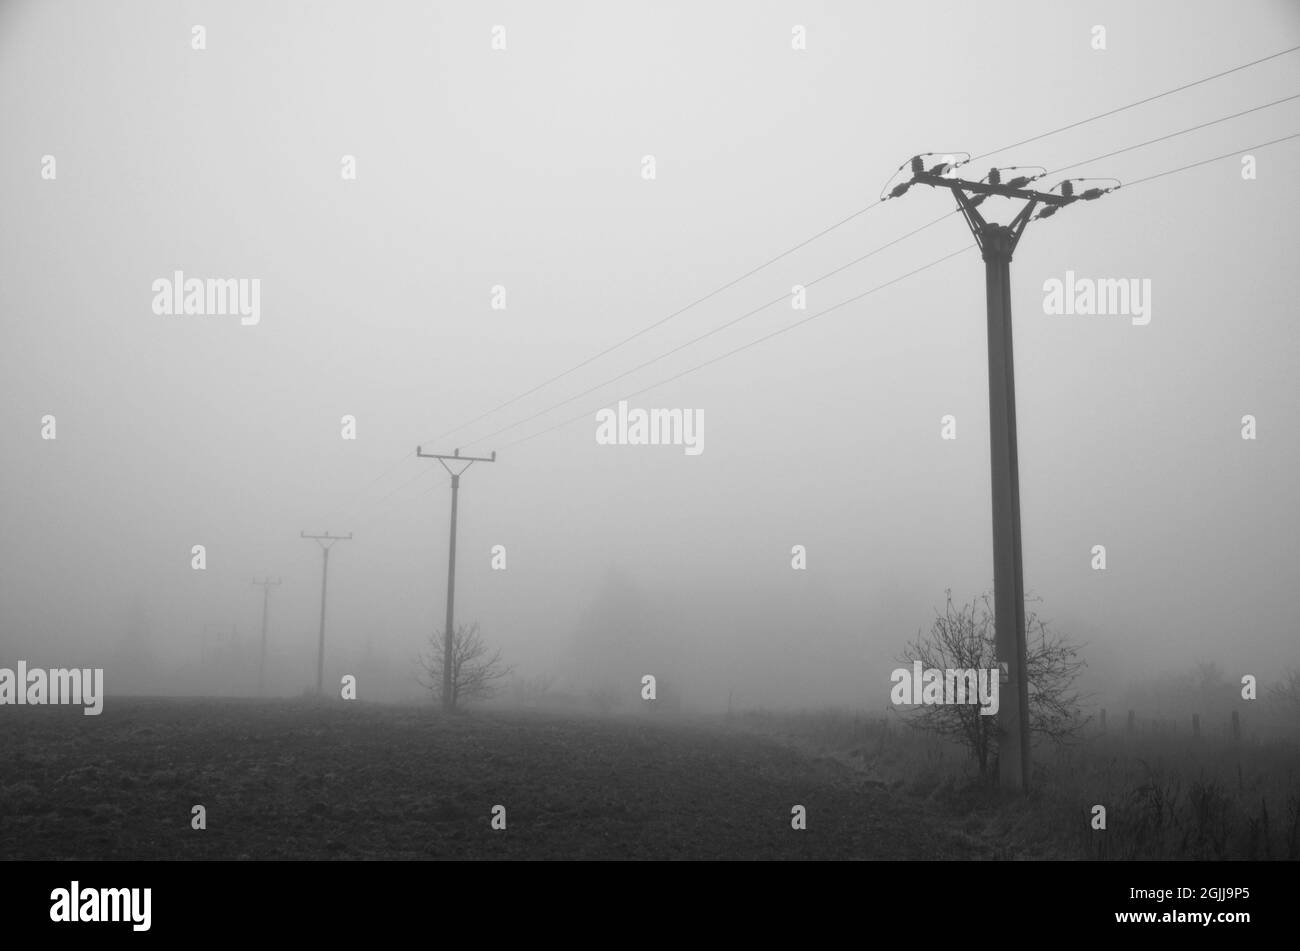 Grayscale shot of electricity wires covered in fog Stock Photo